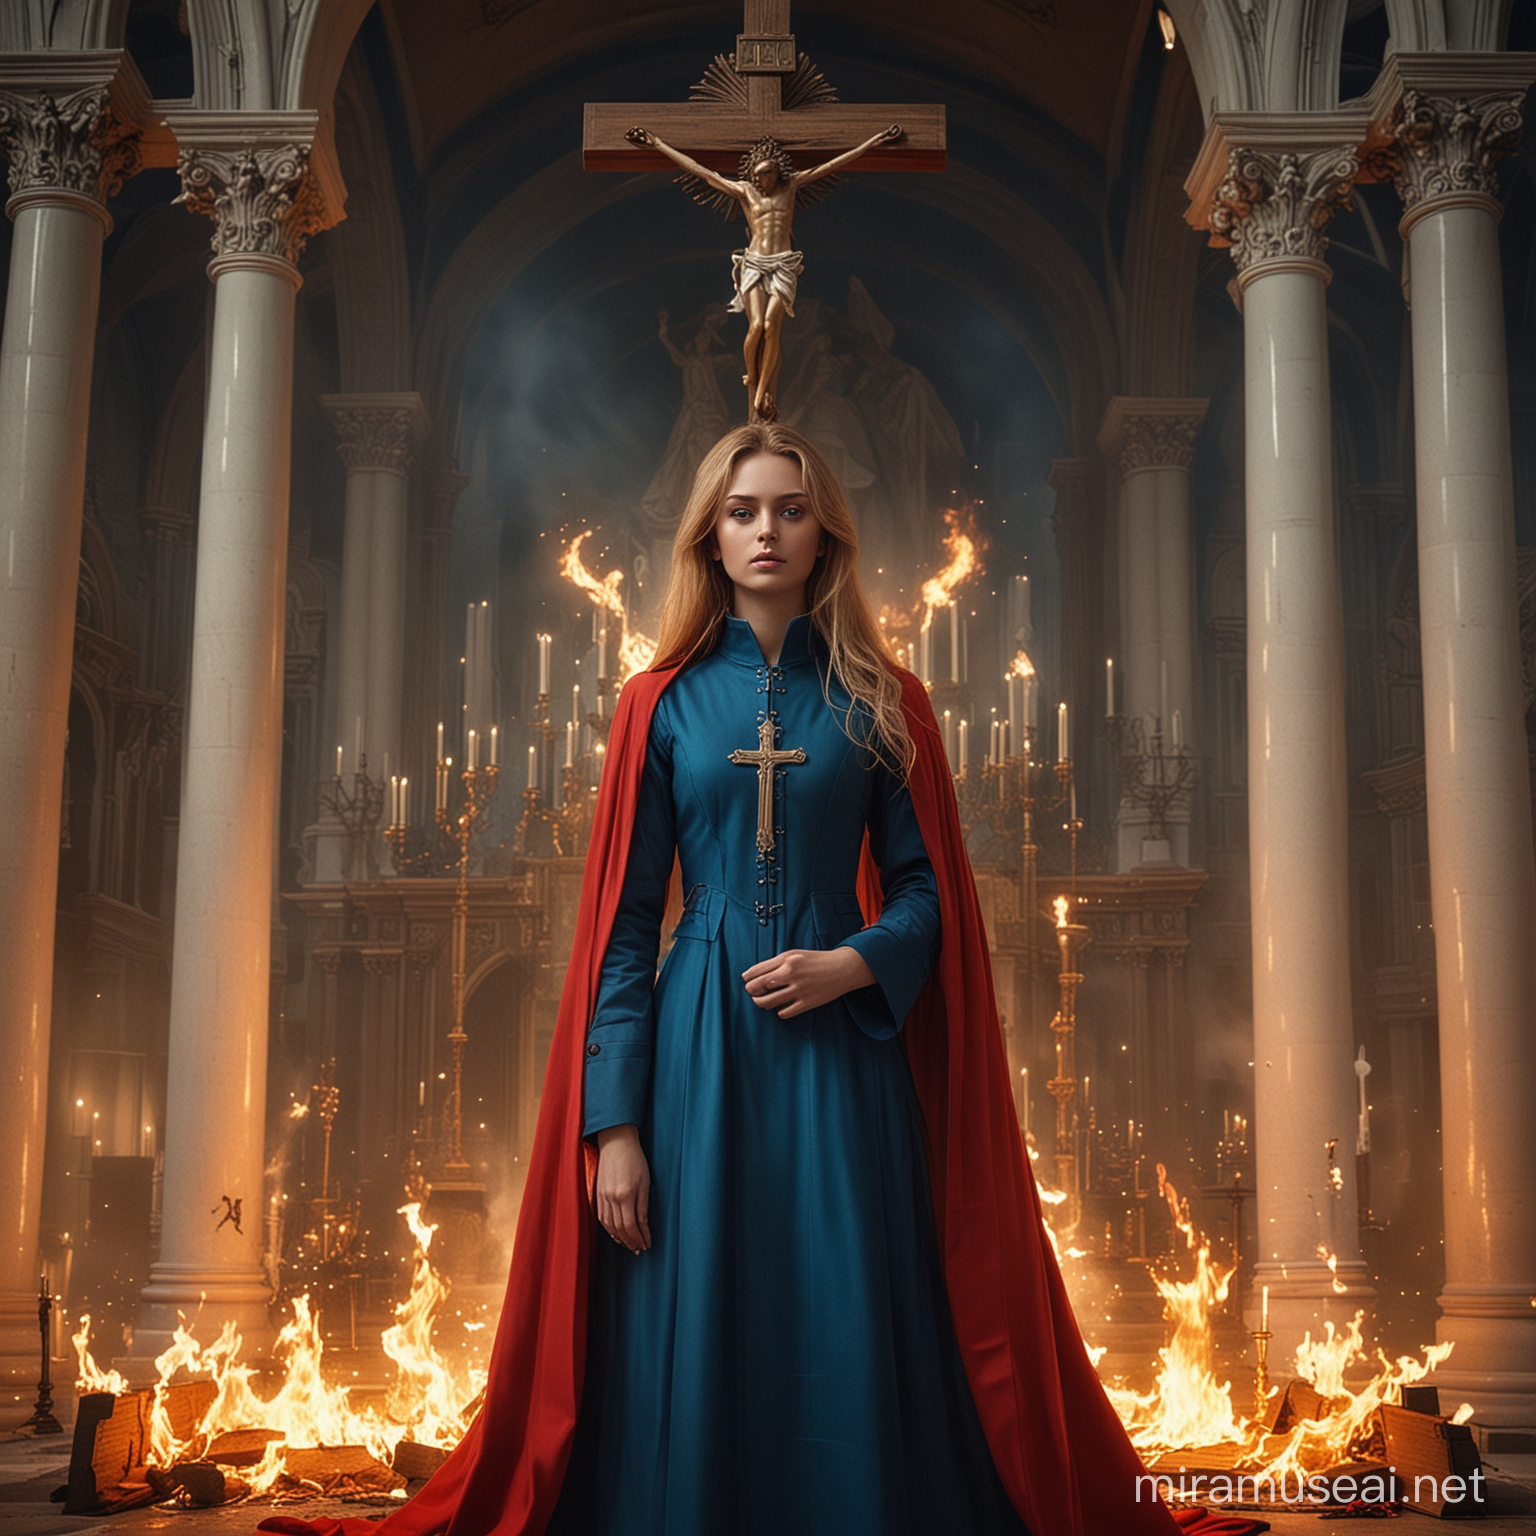 Diabolical Teenage Empress Goddess on BloodStained Altar in Giant Church